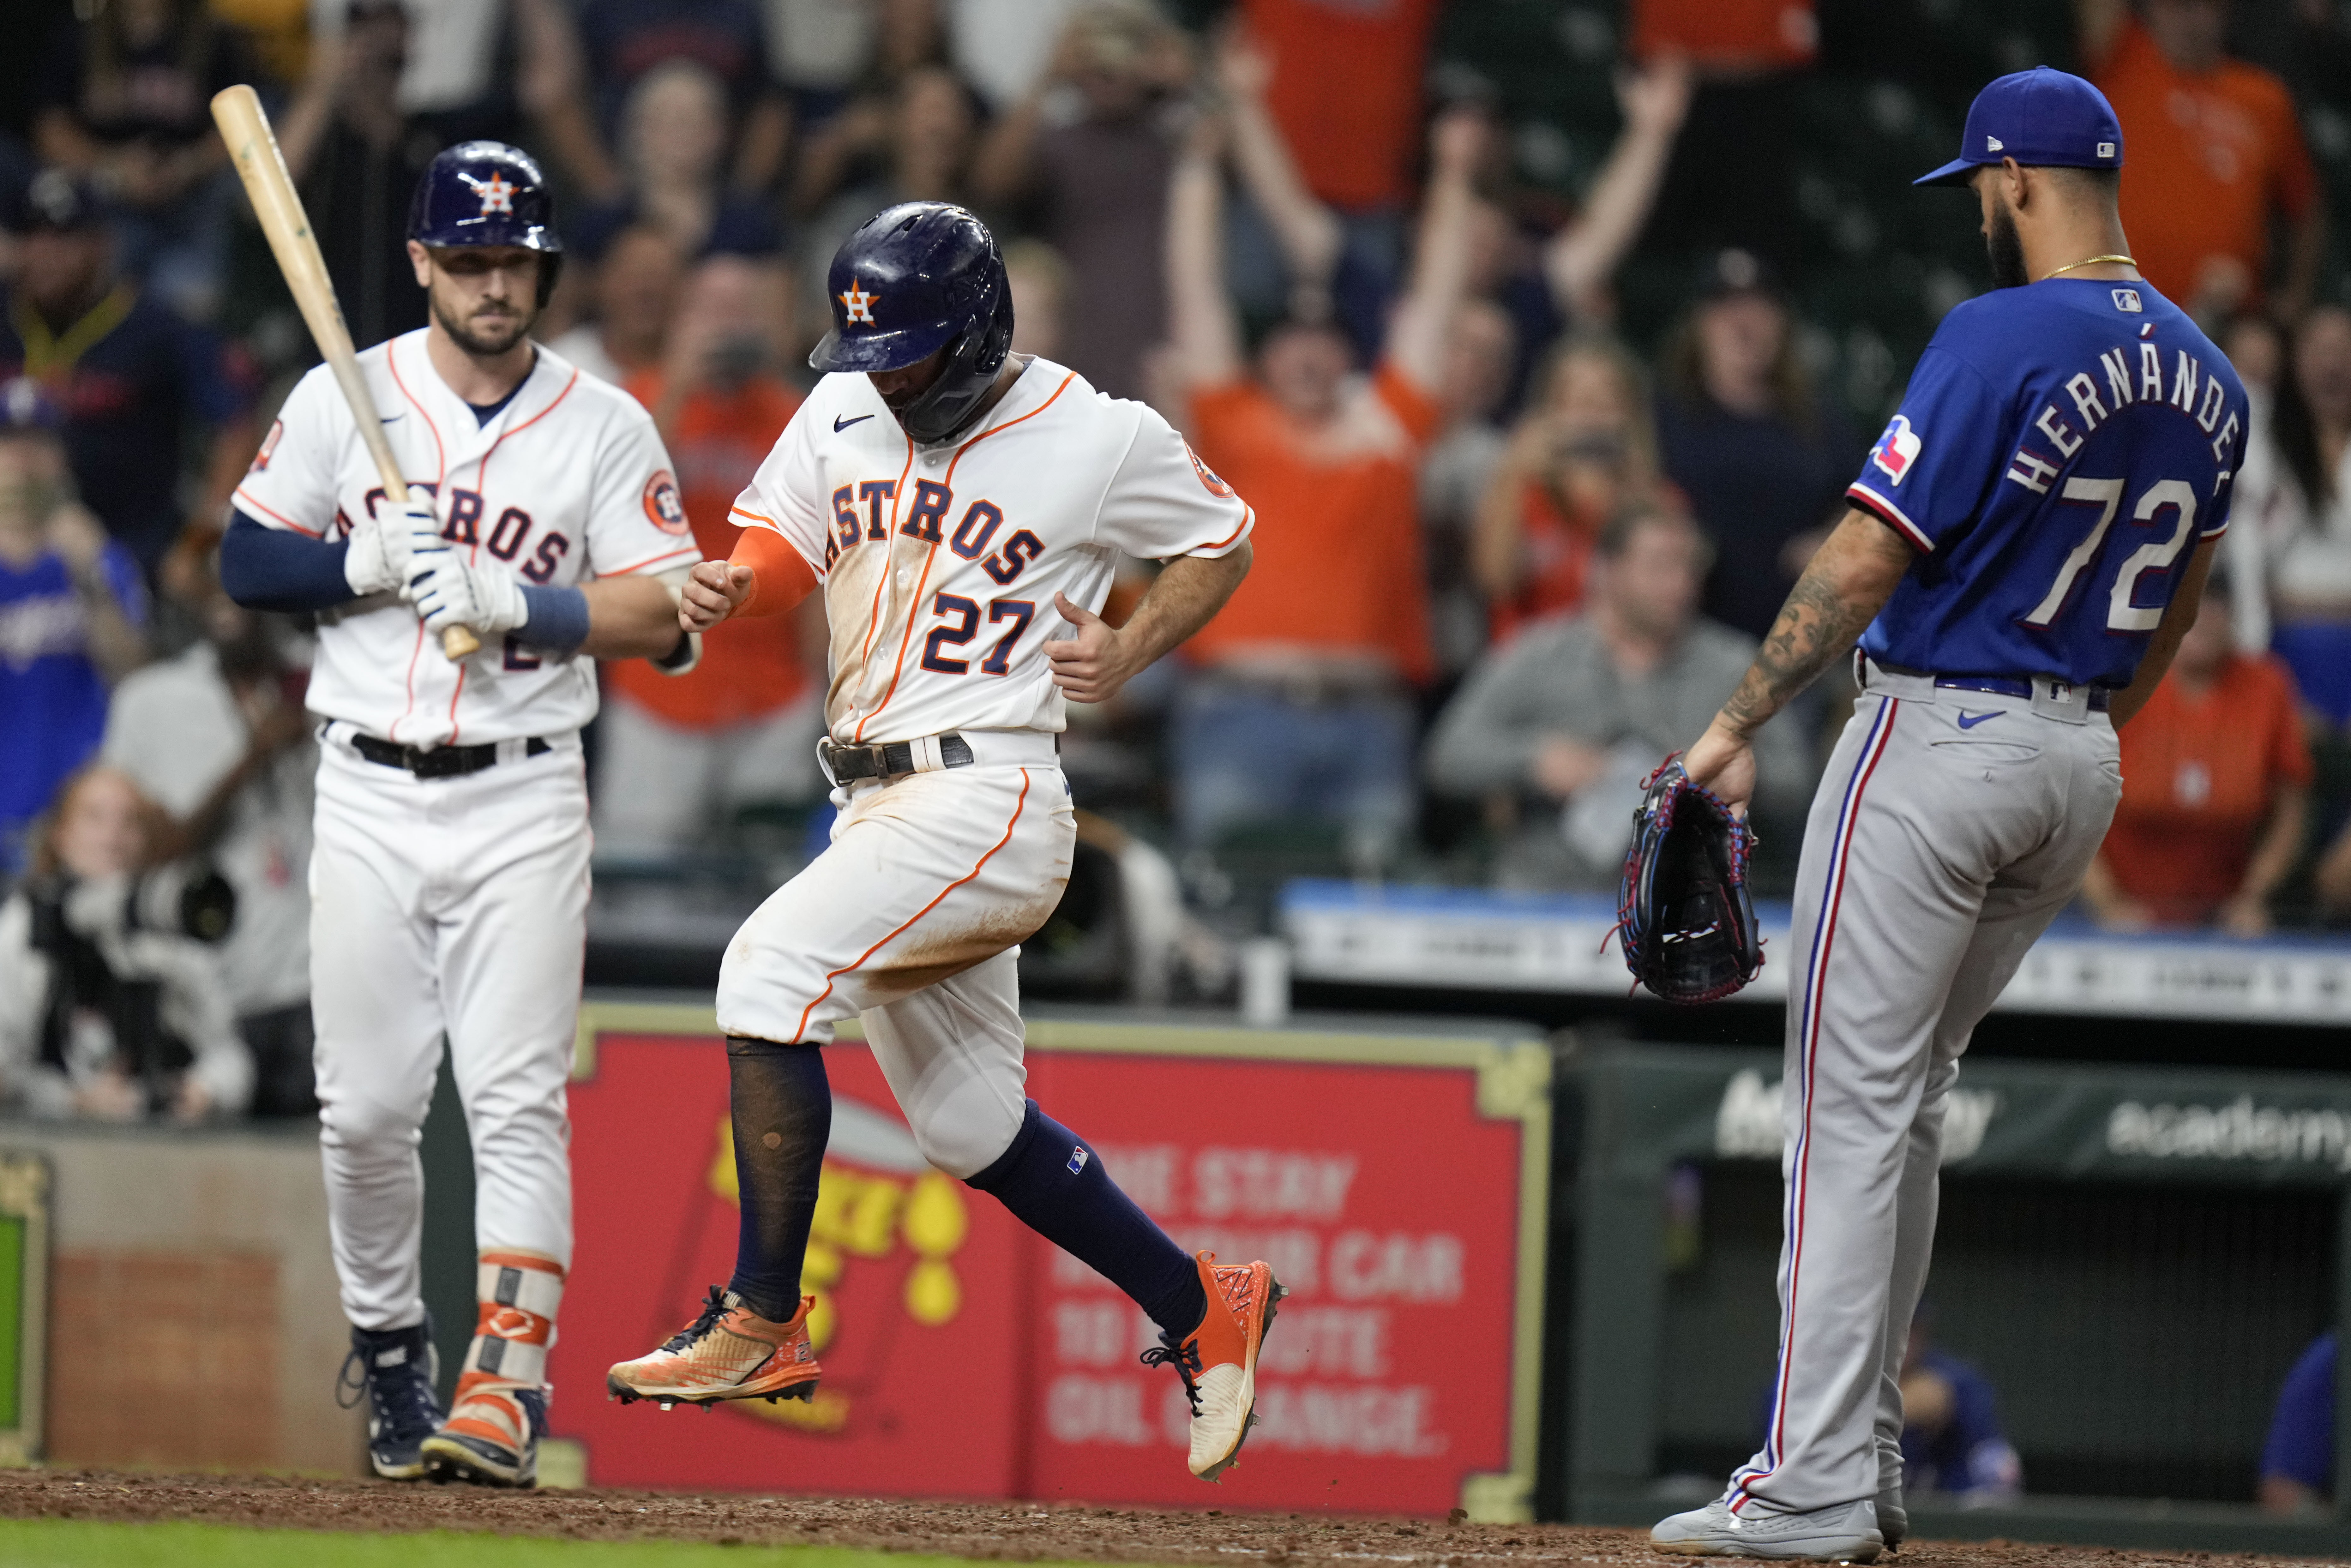 Astros' Jose Altuve explains baserunning mistake in loss to Rangers